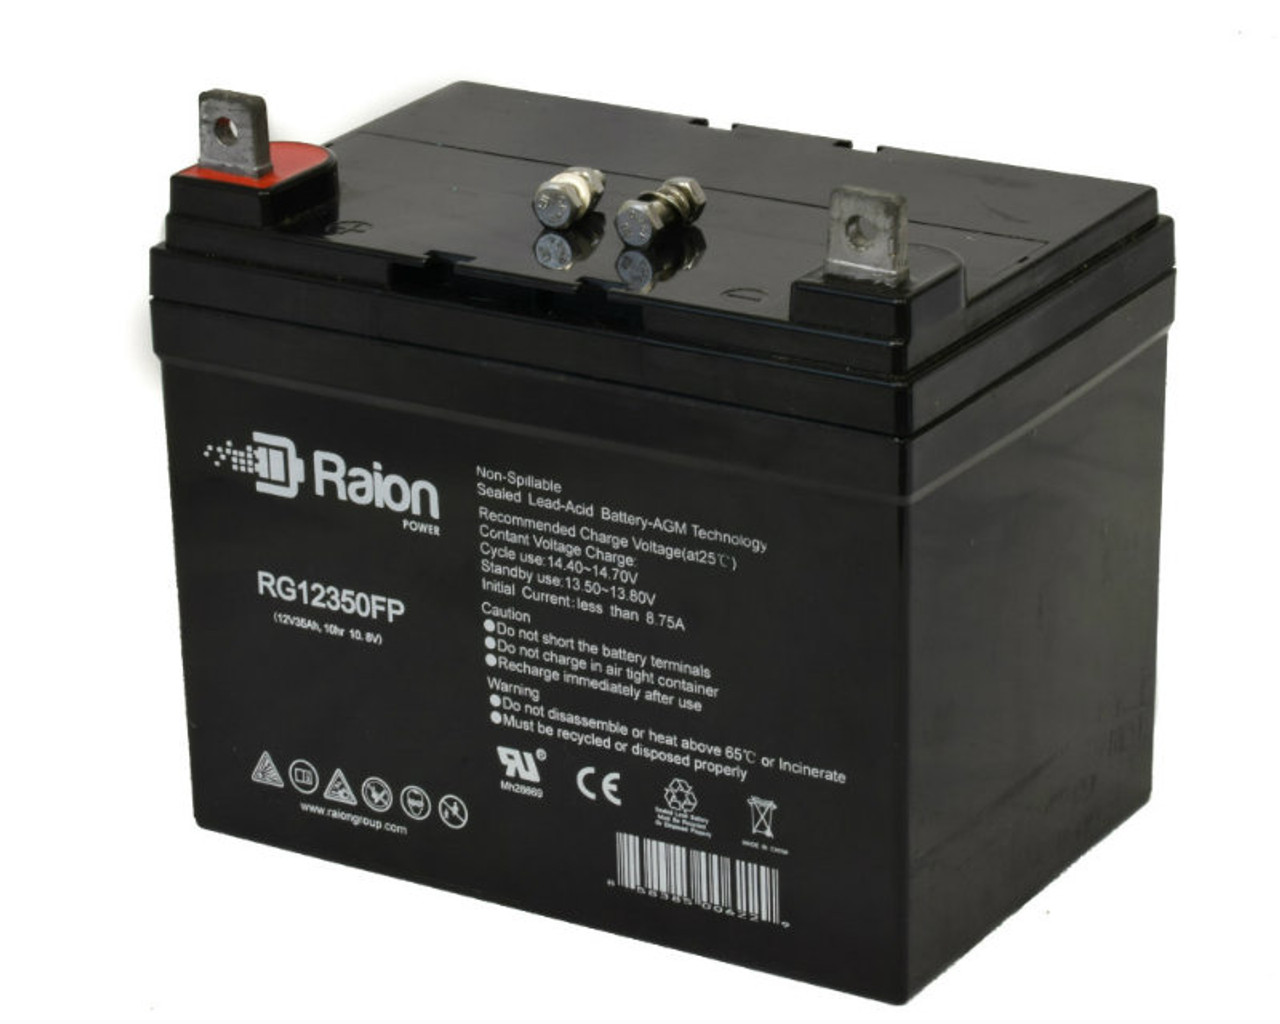 Raion Power Replacement 12V 35Ah RG12350FP Battery for Simplicity EXPRESS 15.5H